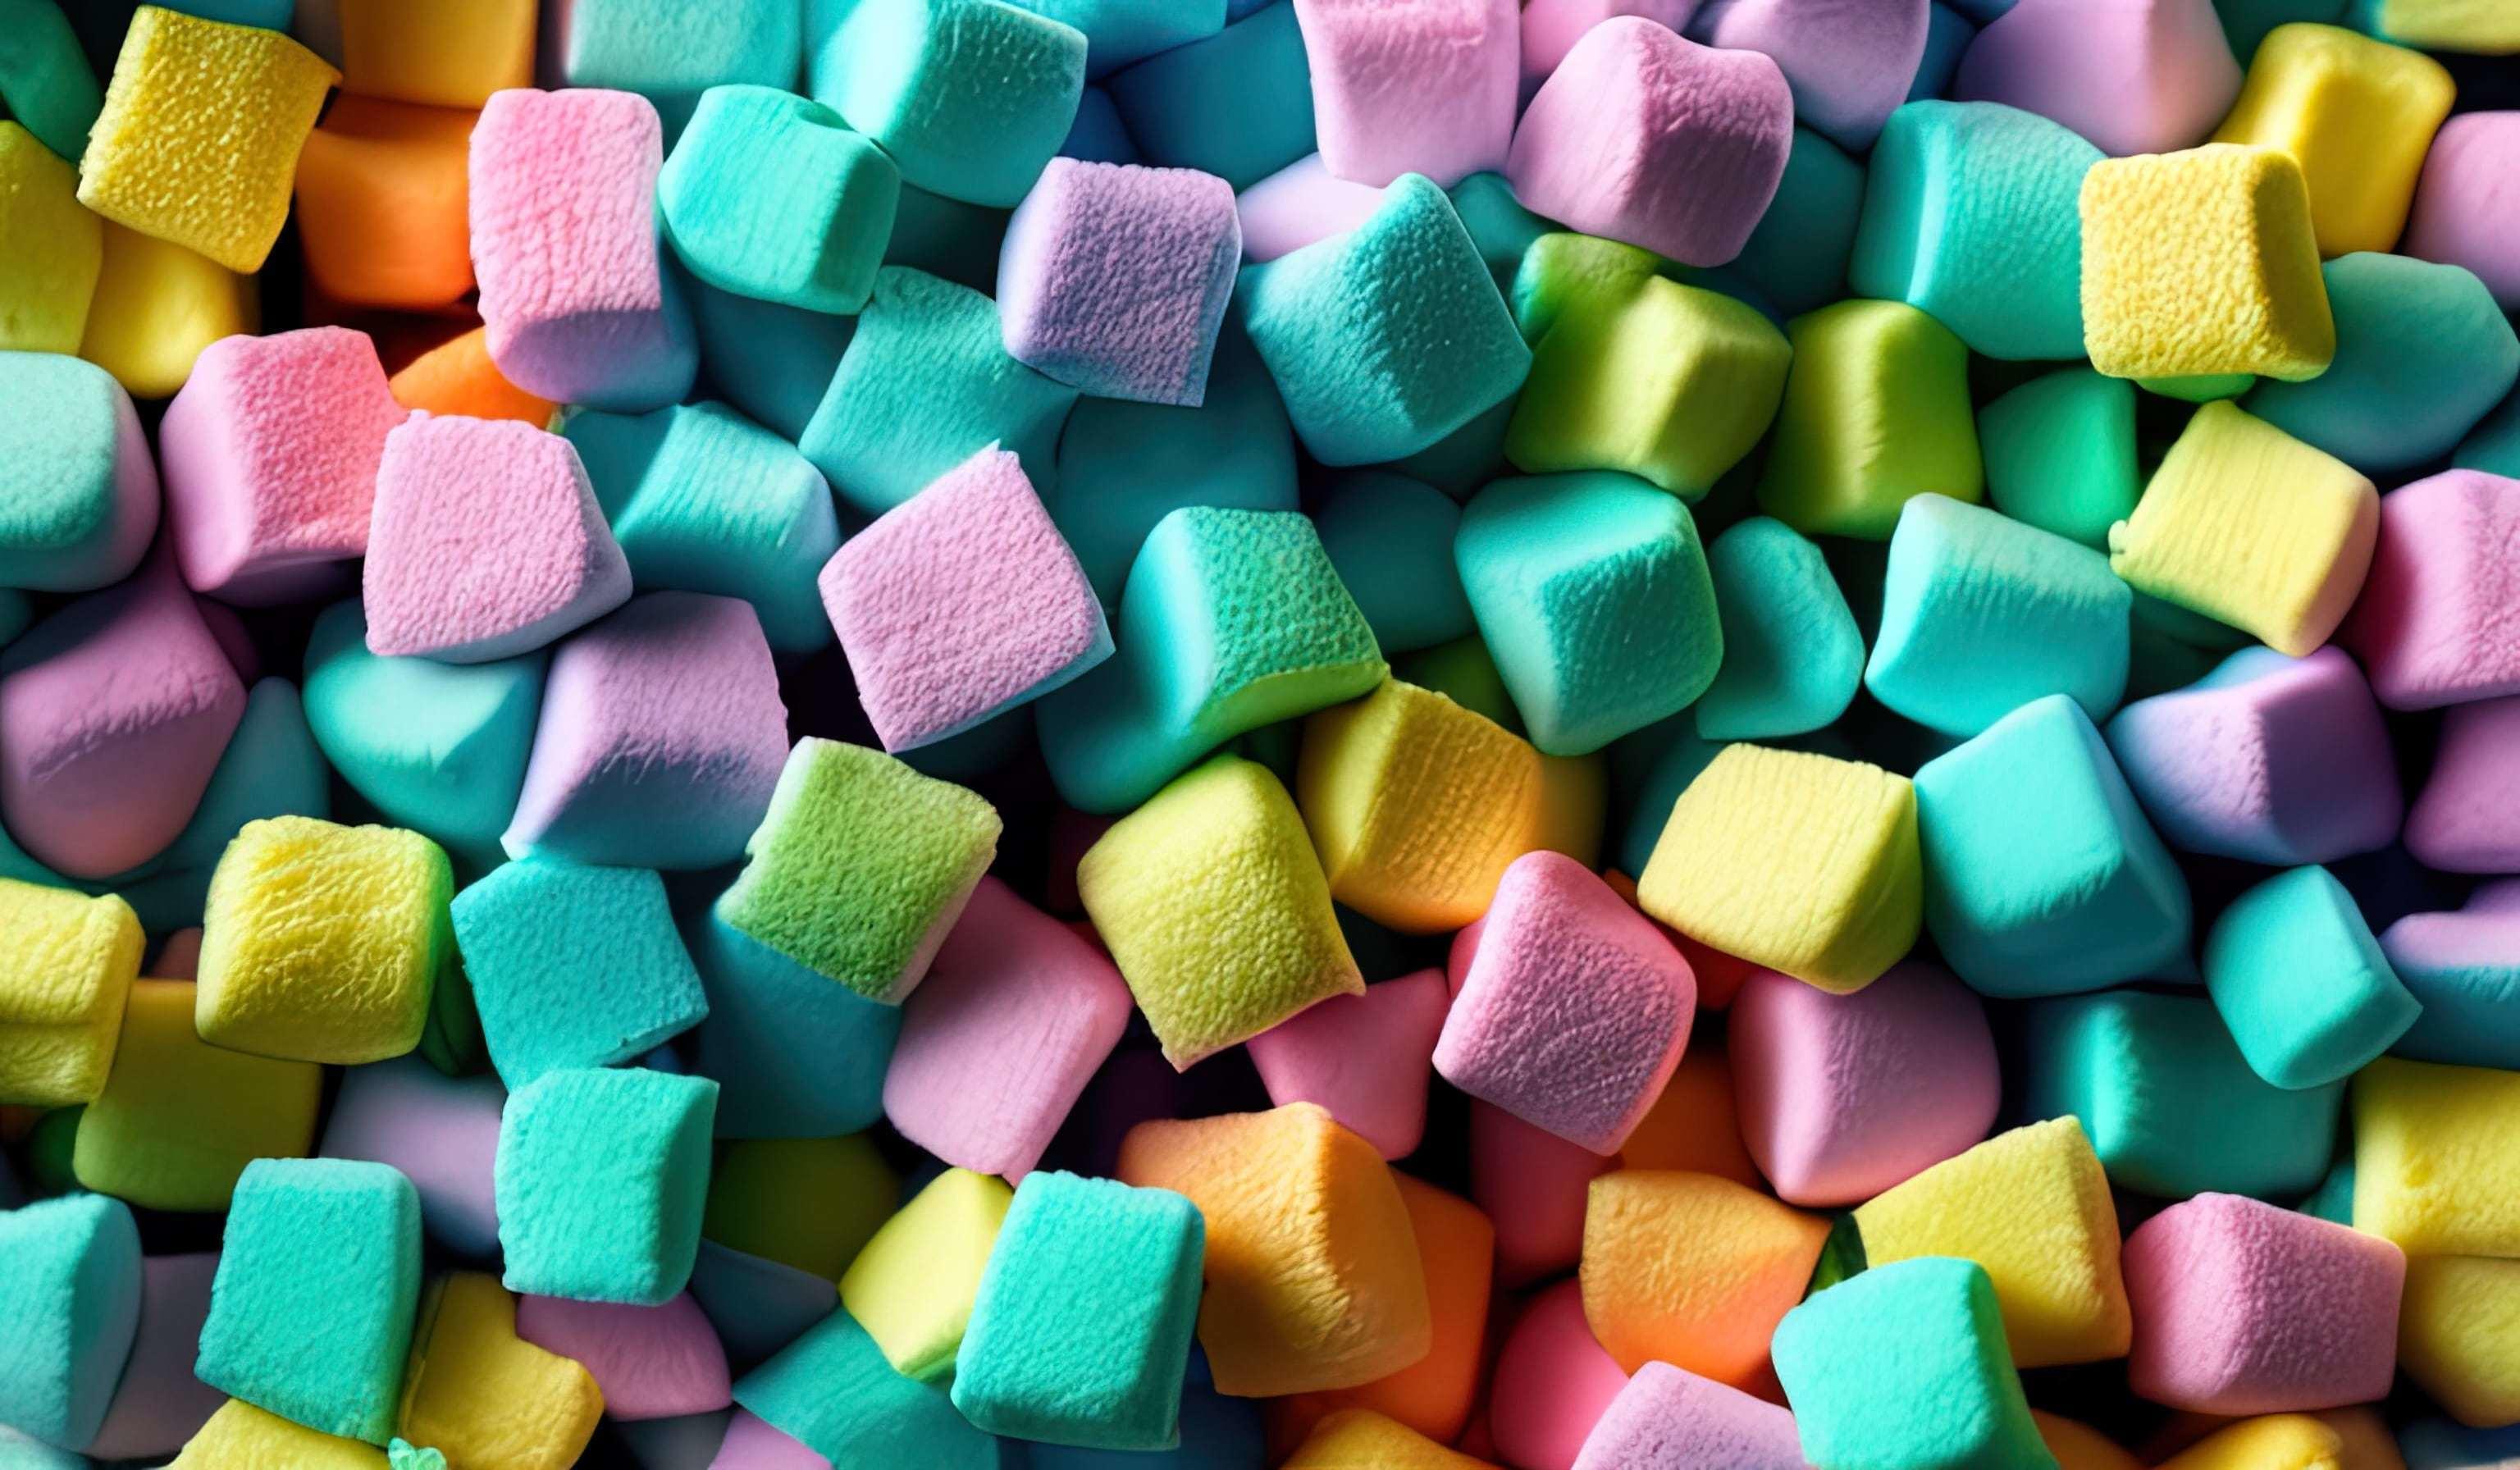 Professional Food Photography Closeup Of A Marshmallows. Chewy Candy Close Up On A Turquoise Background